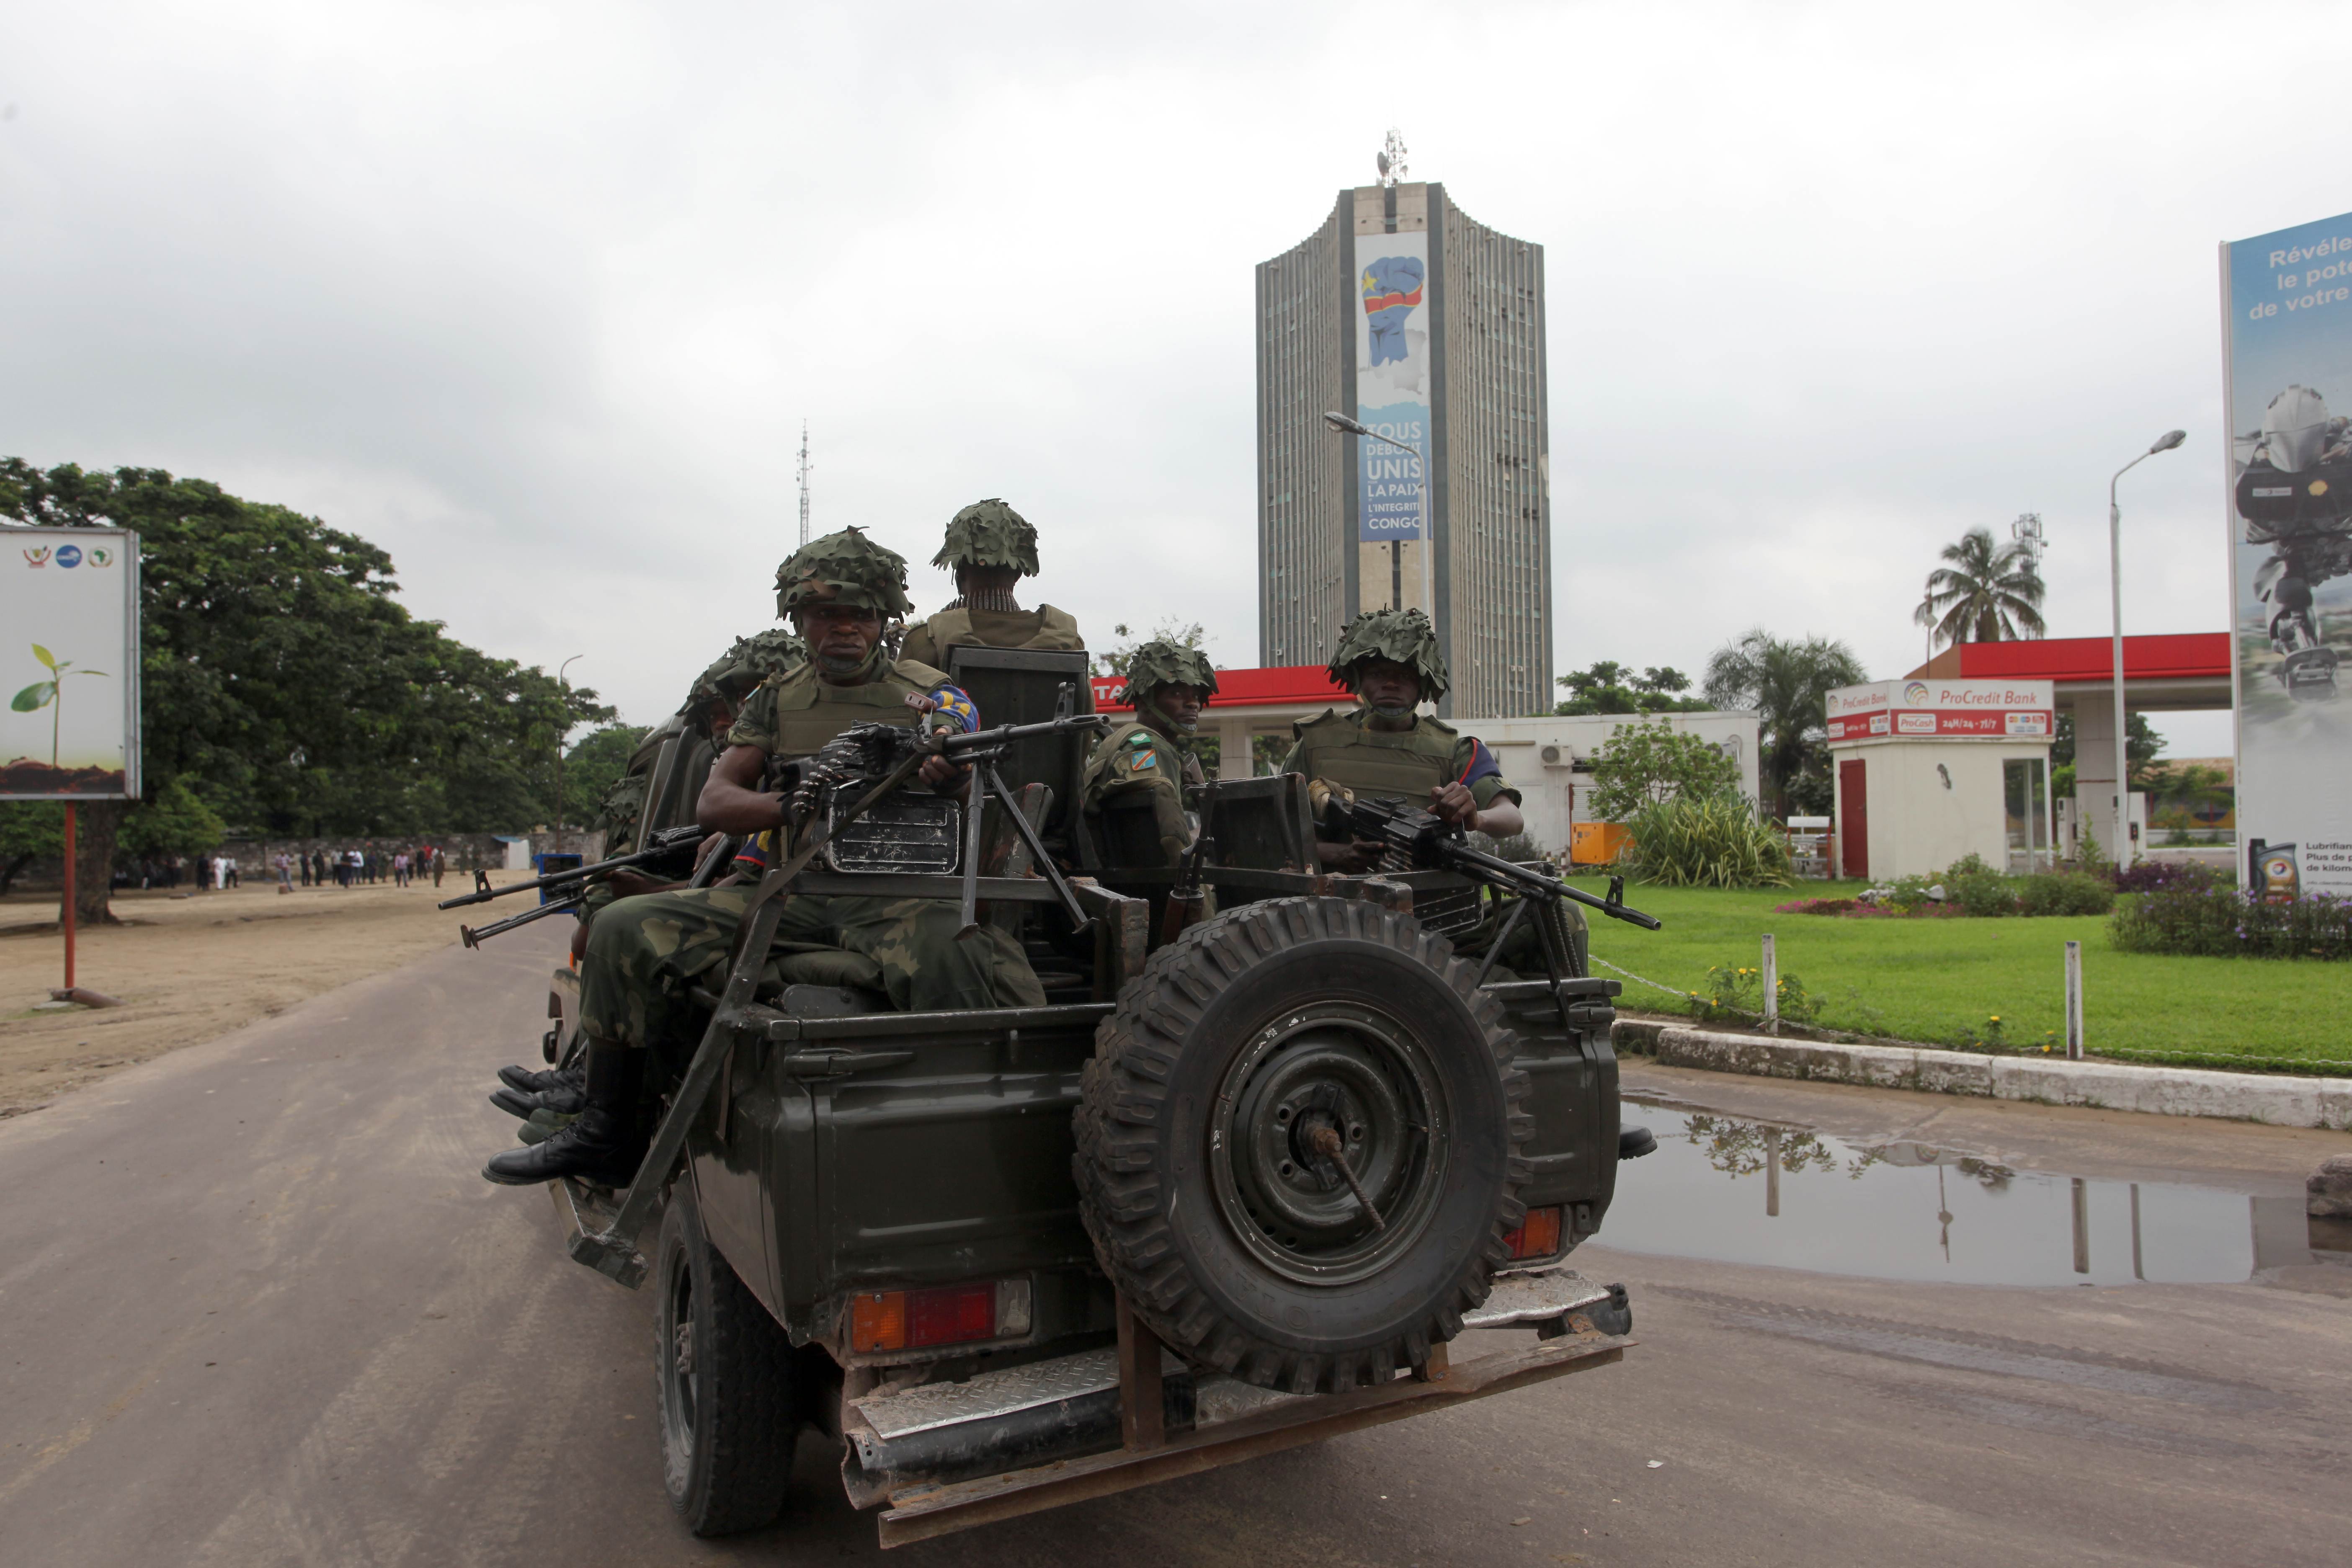 Soldiers of the Democratic Republic of Congo Army patrol after gunfire erupted at the state broadcaster in Kinshasa. Photo: AFP